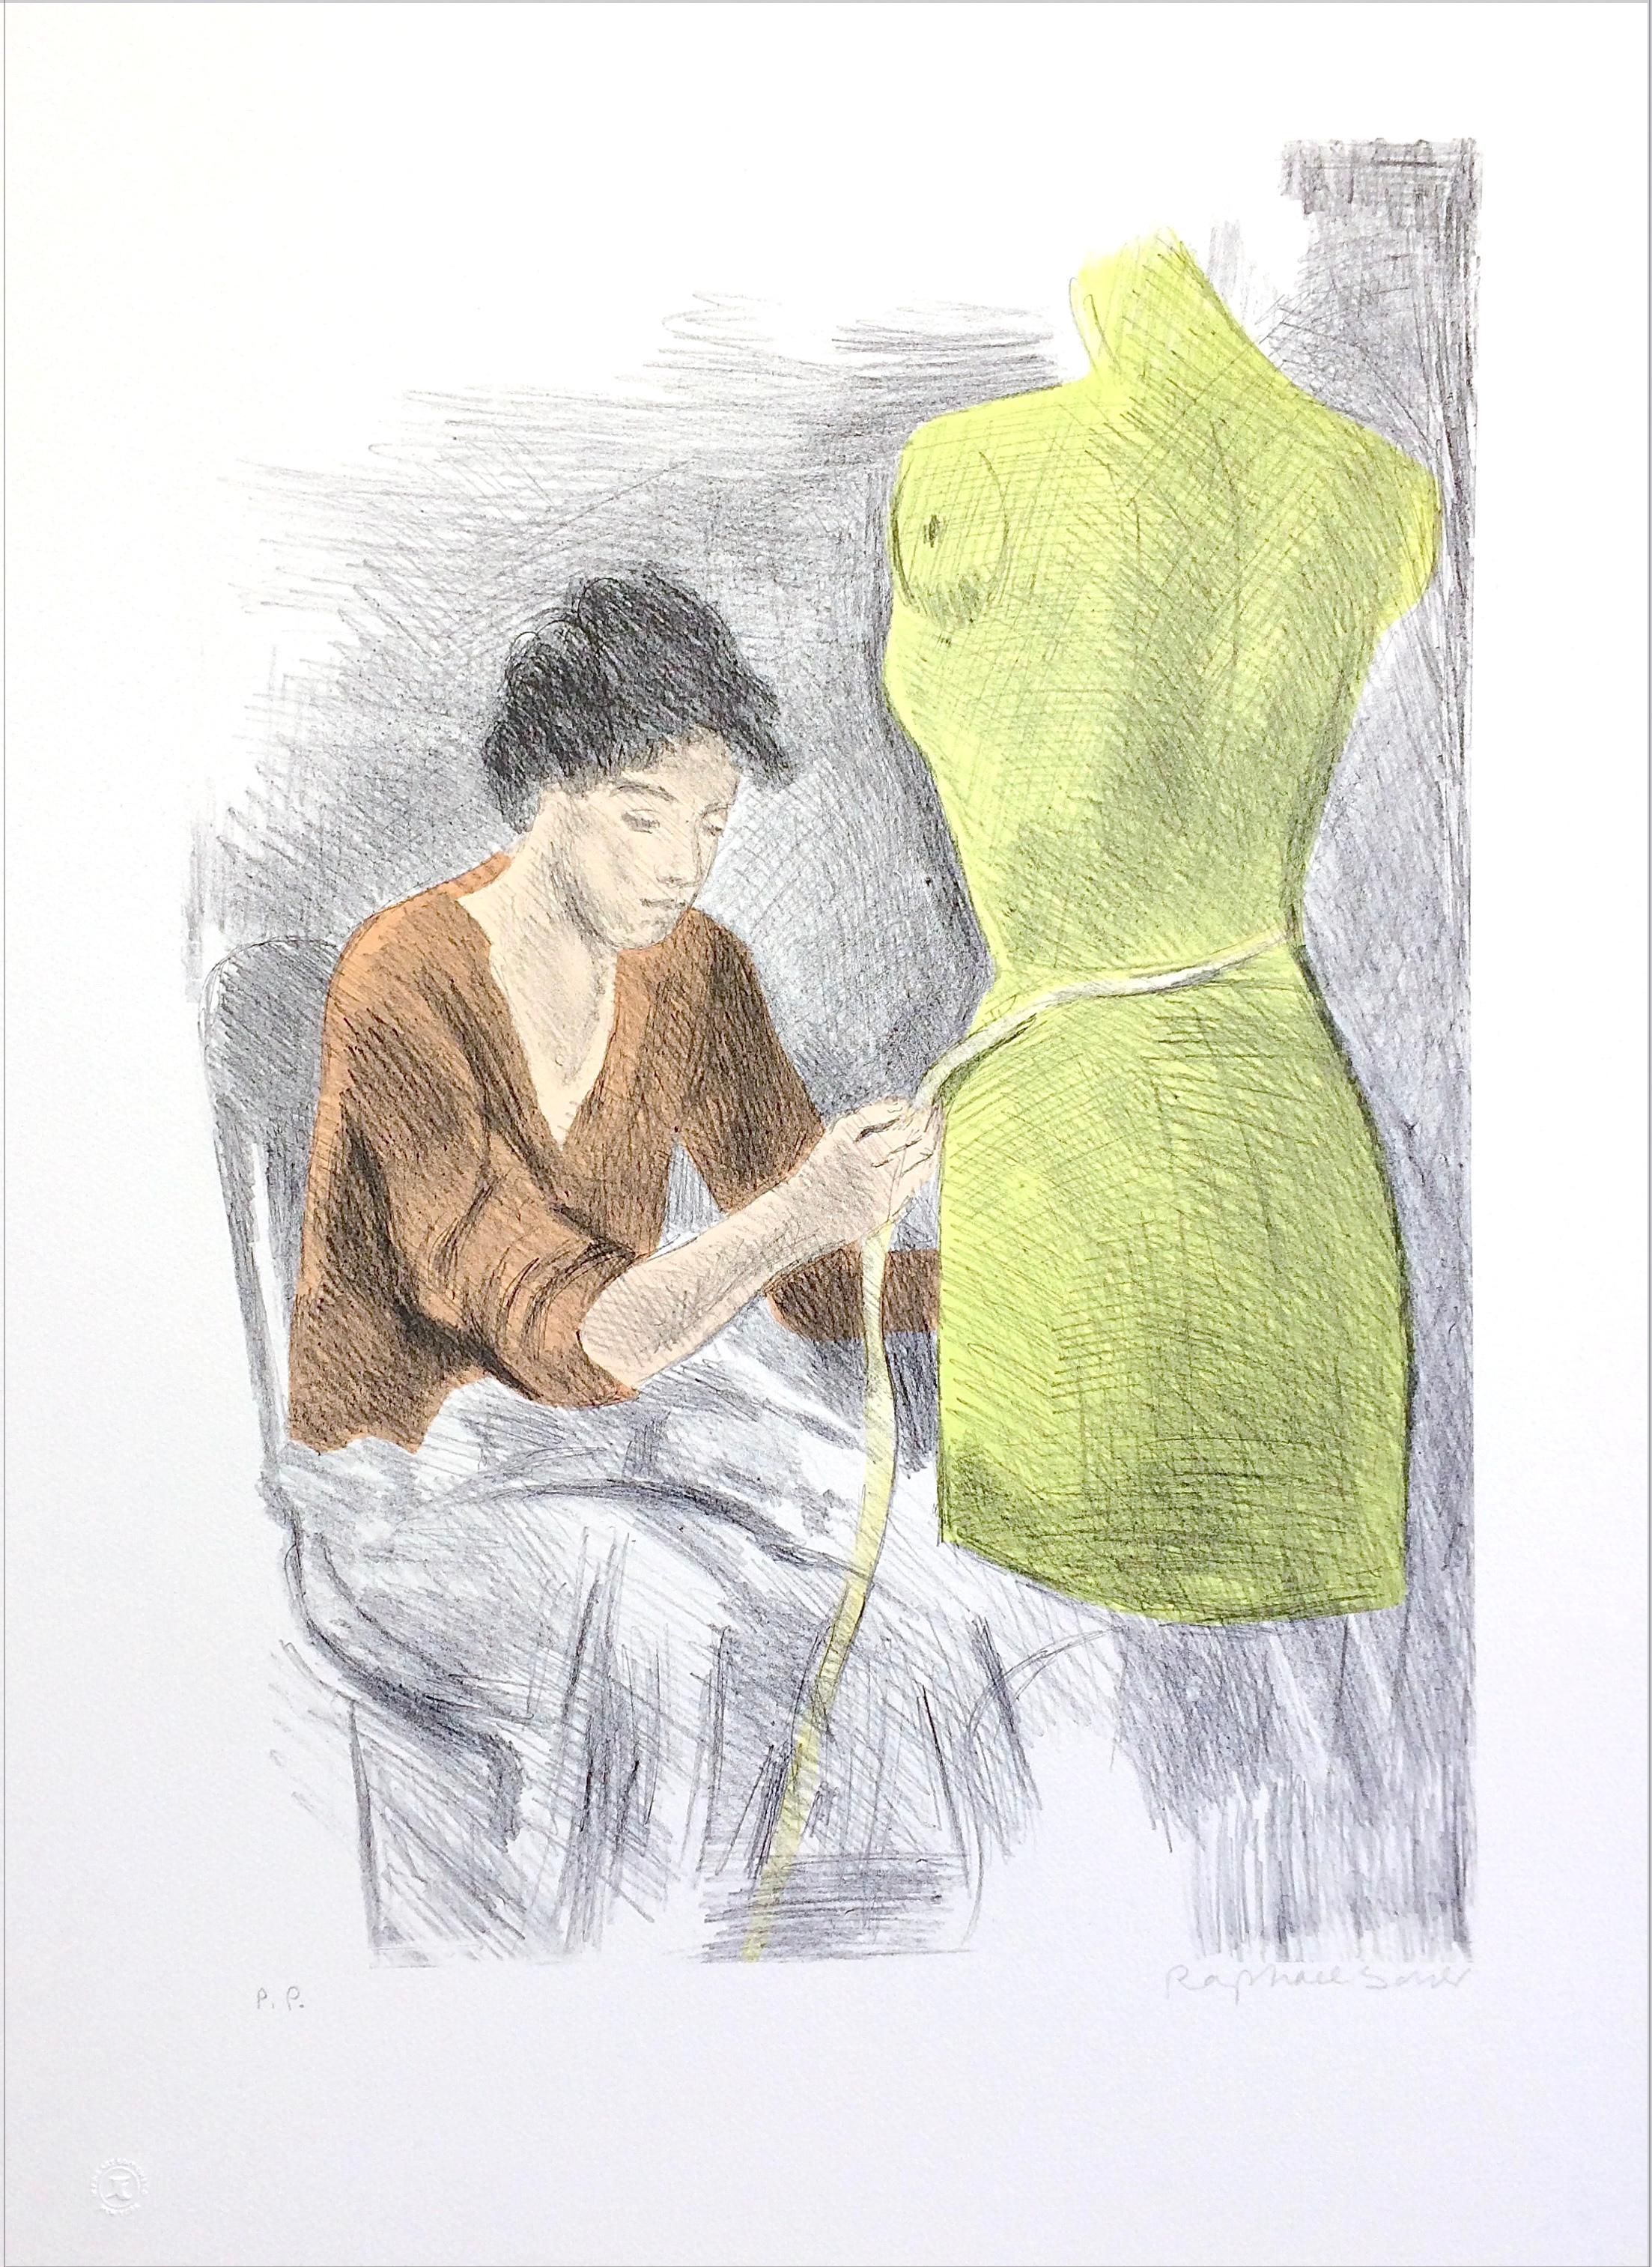 SEATED SEAMSTRESS is an original hand drawn (not digitally or photo reproduced) limited edition lithograph by the artist Raphael Soyer - Russian/American Social Realism Painter, 1899-1987. Printed in graphite gray, black, light peach, light rust,